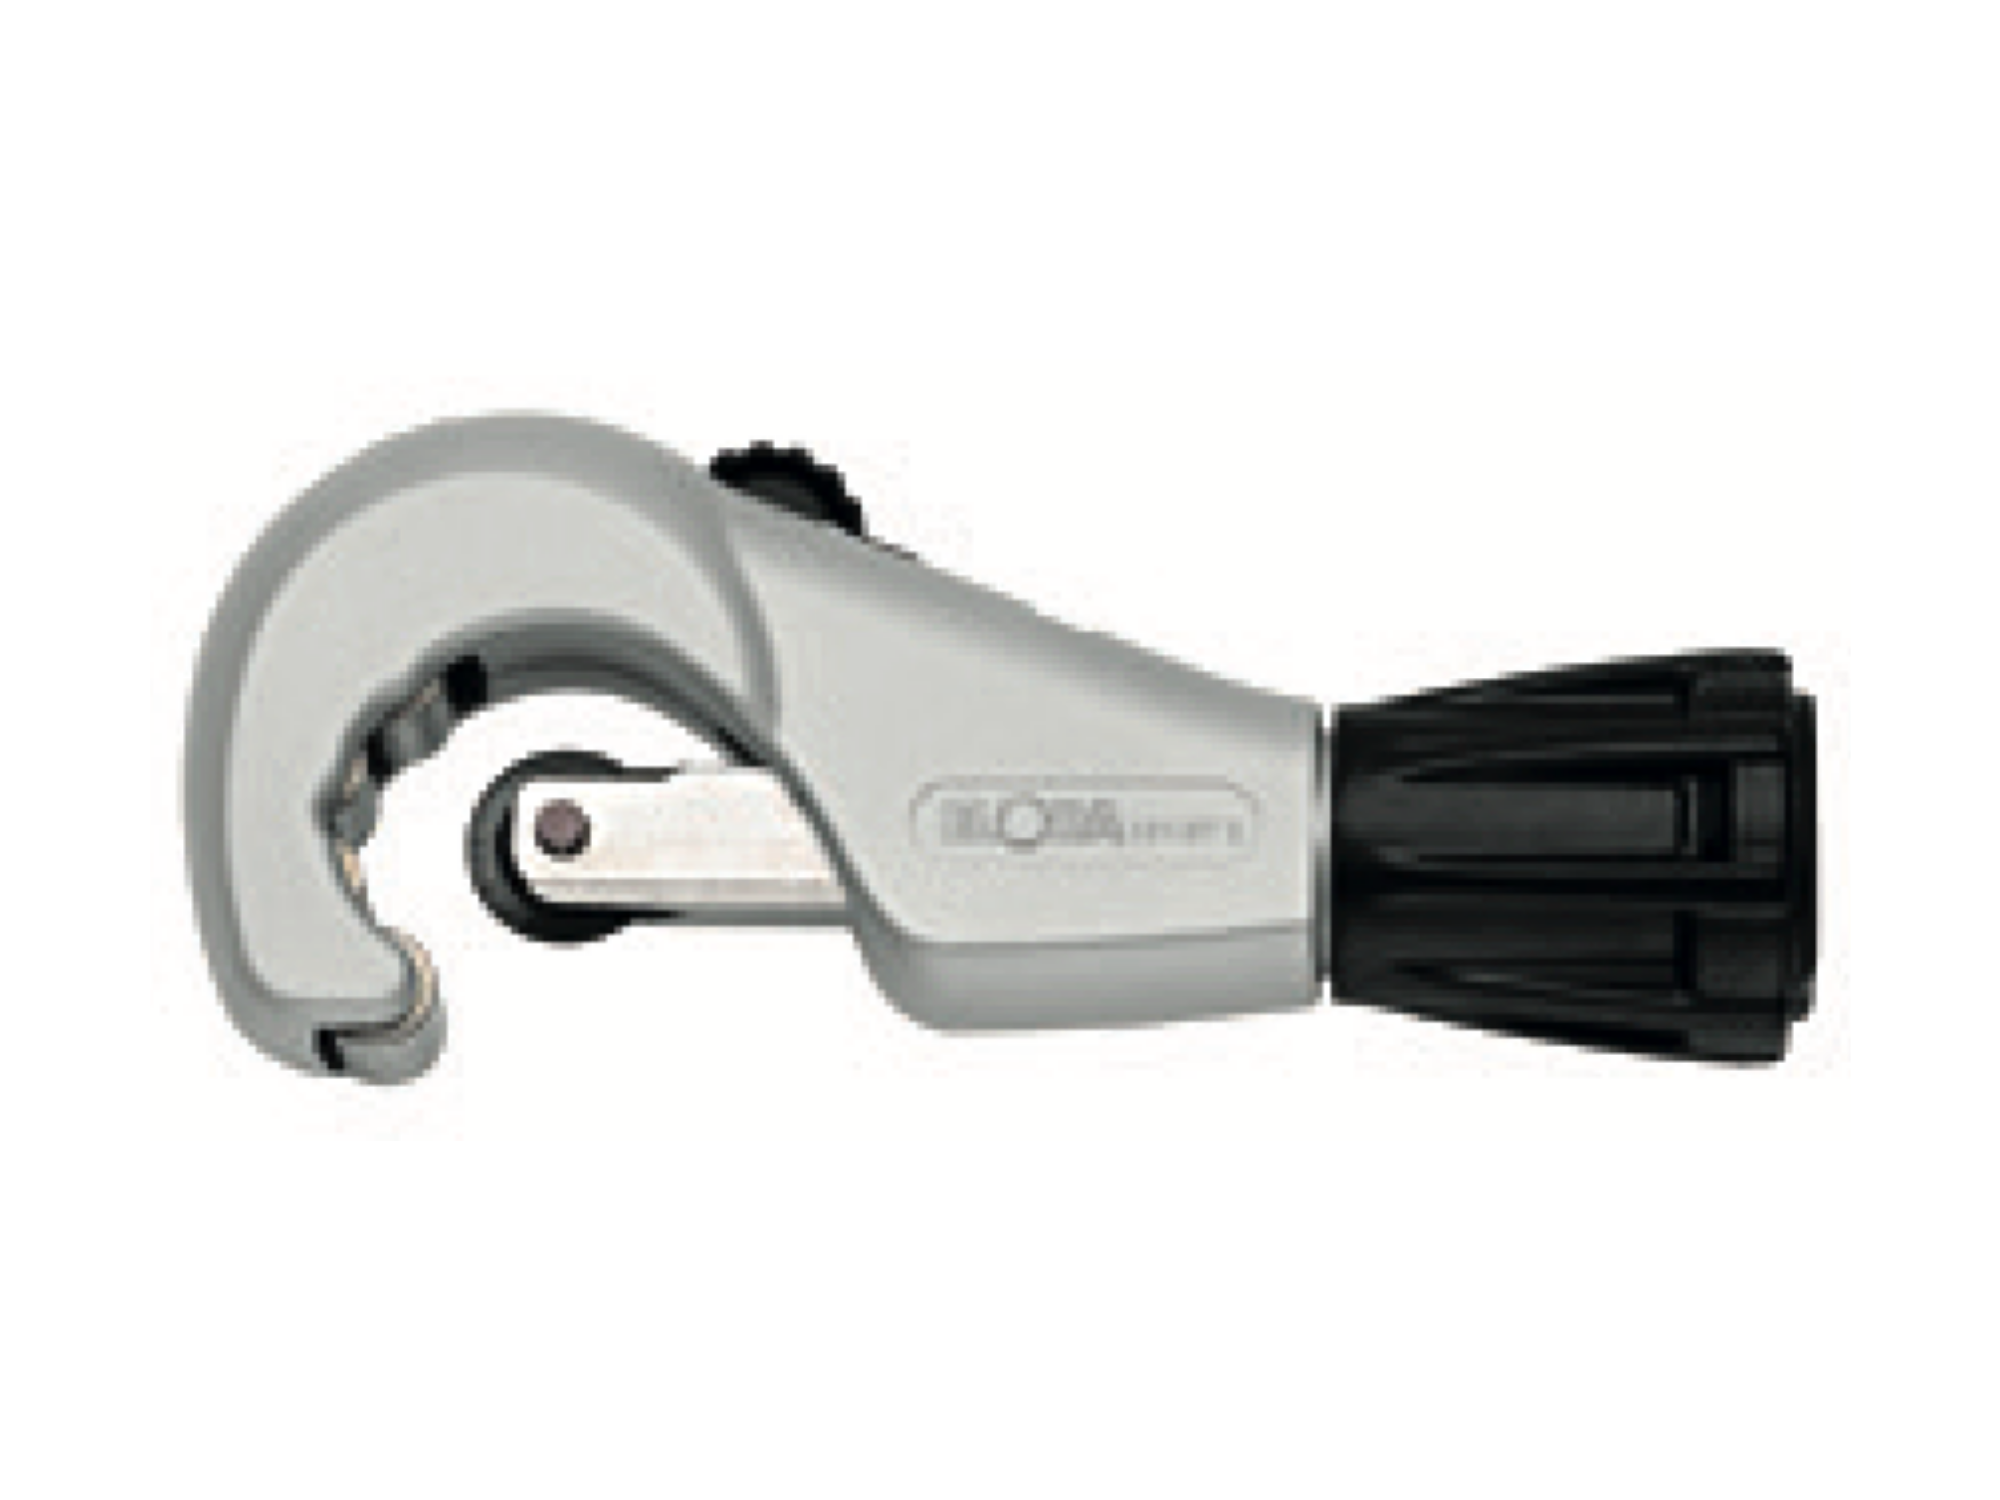 ELORA 181-ST3 Pipe Cutter For Thin-Walled Metal Tube 6-76 mm - Premium Pipe Cutter from ELORA - Shop now at Yew Aik.